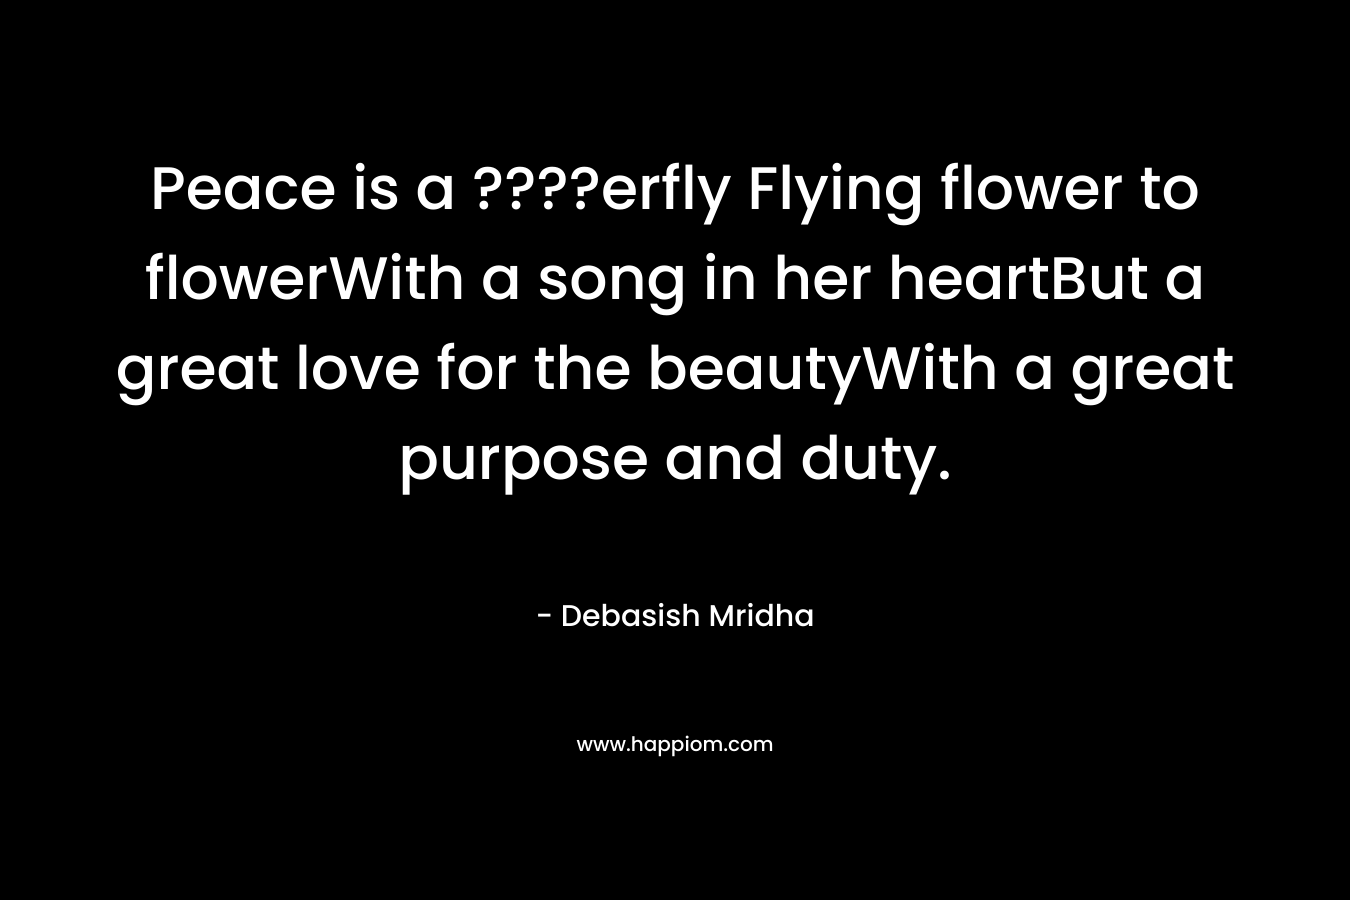 Peace is a ????erfly Flying flower to flowerWith a song in her heartBut a great love for the beautyWith a great purpose and duty. – Debasish Mridha